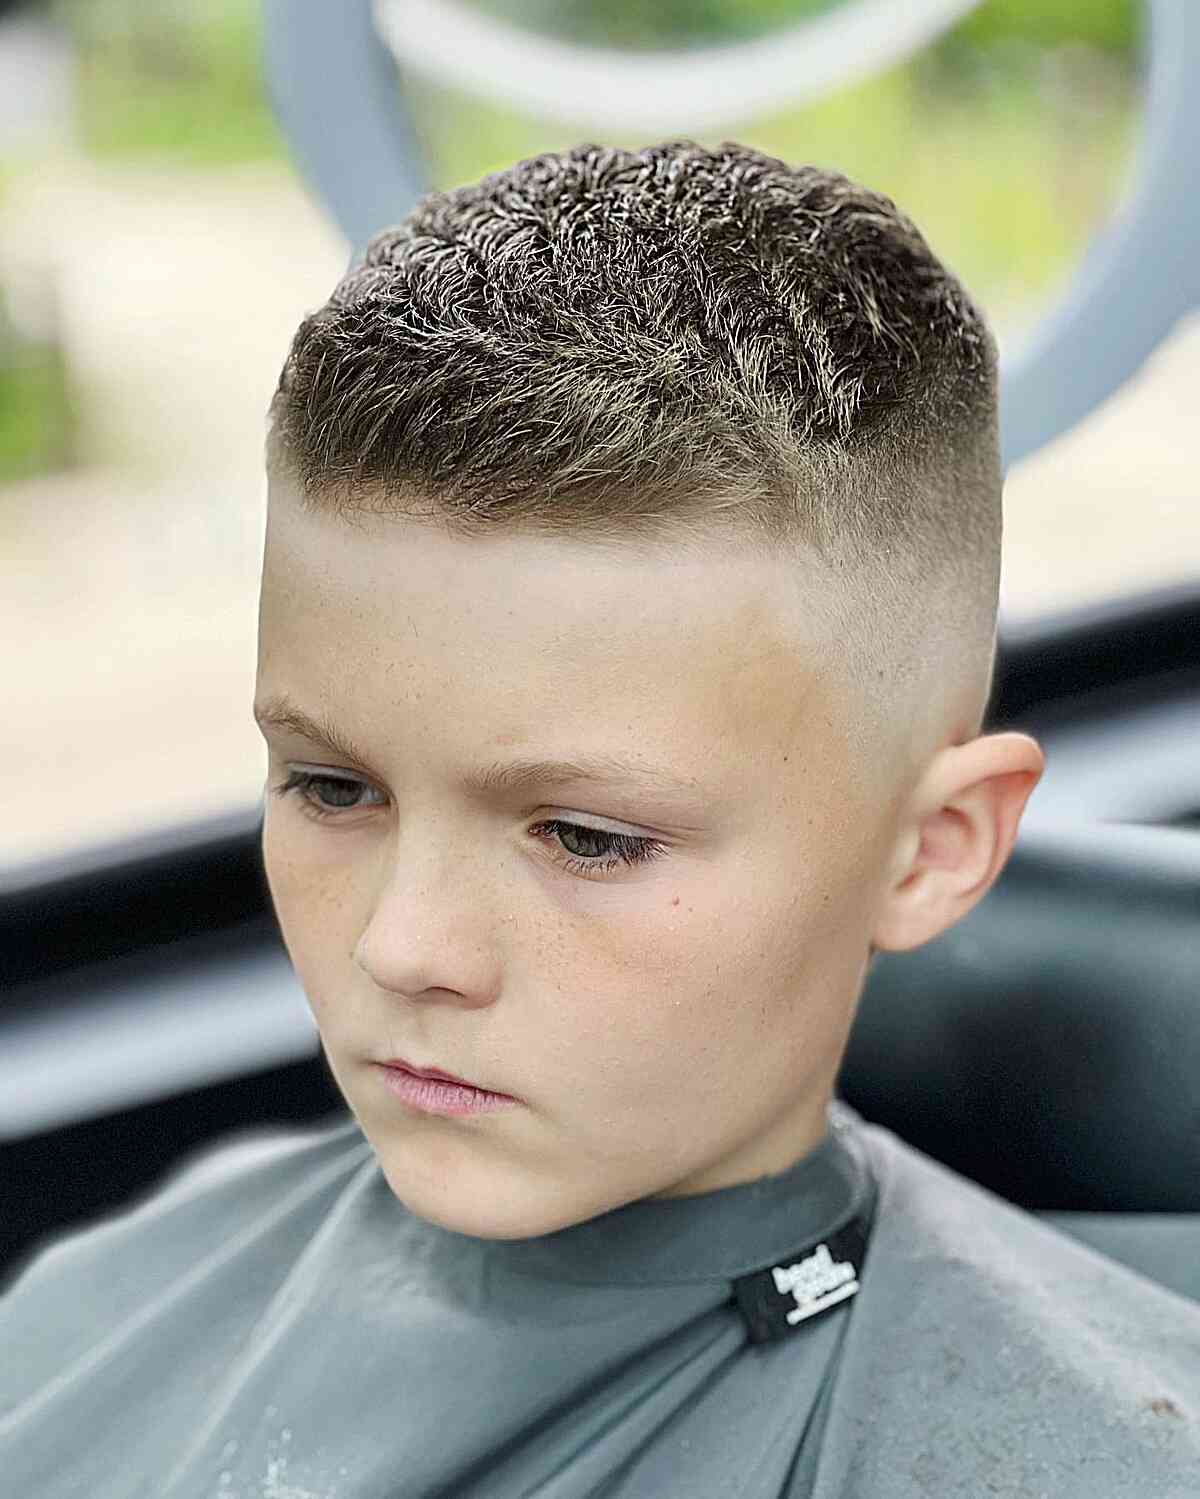 Skin Fade with a Textured Short Top for Boys with very short hair